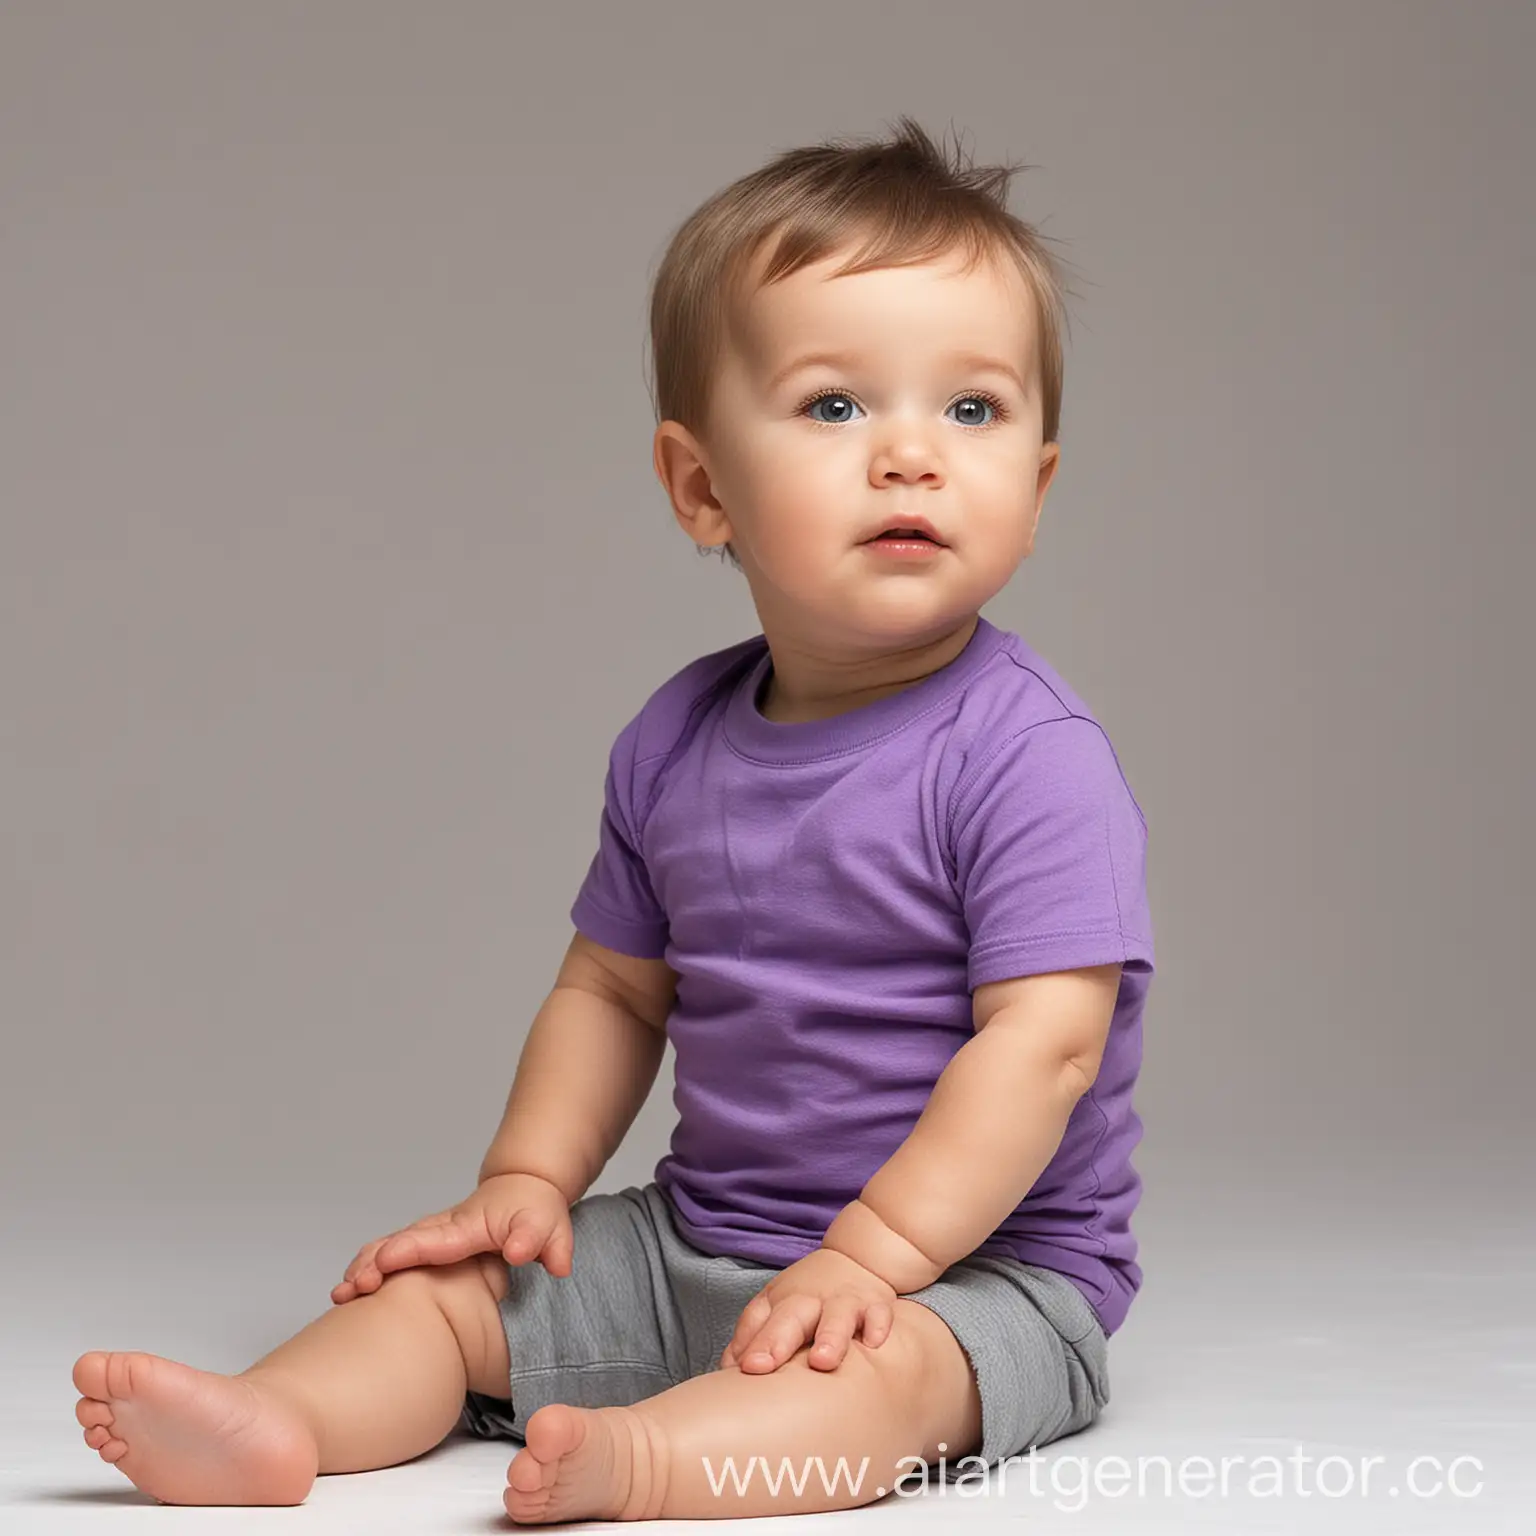 A 1-year-old boy in a purple T-shirt, sitting, bright light, on a white background